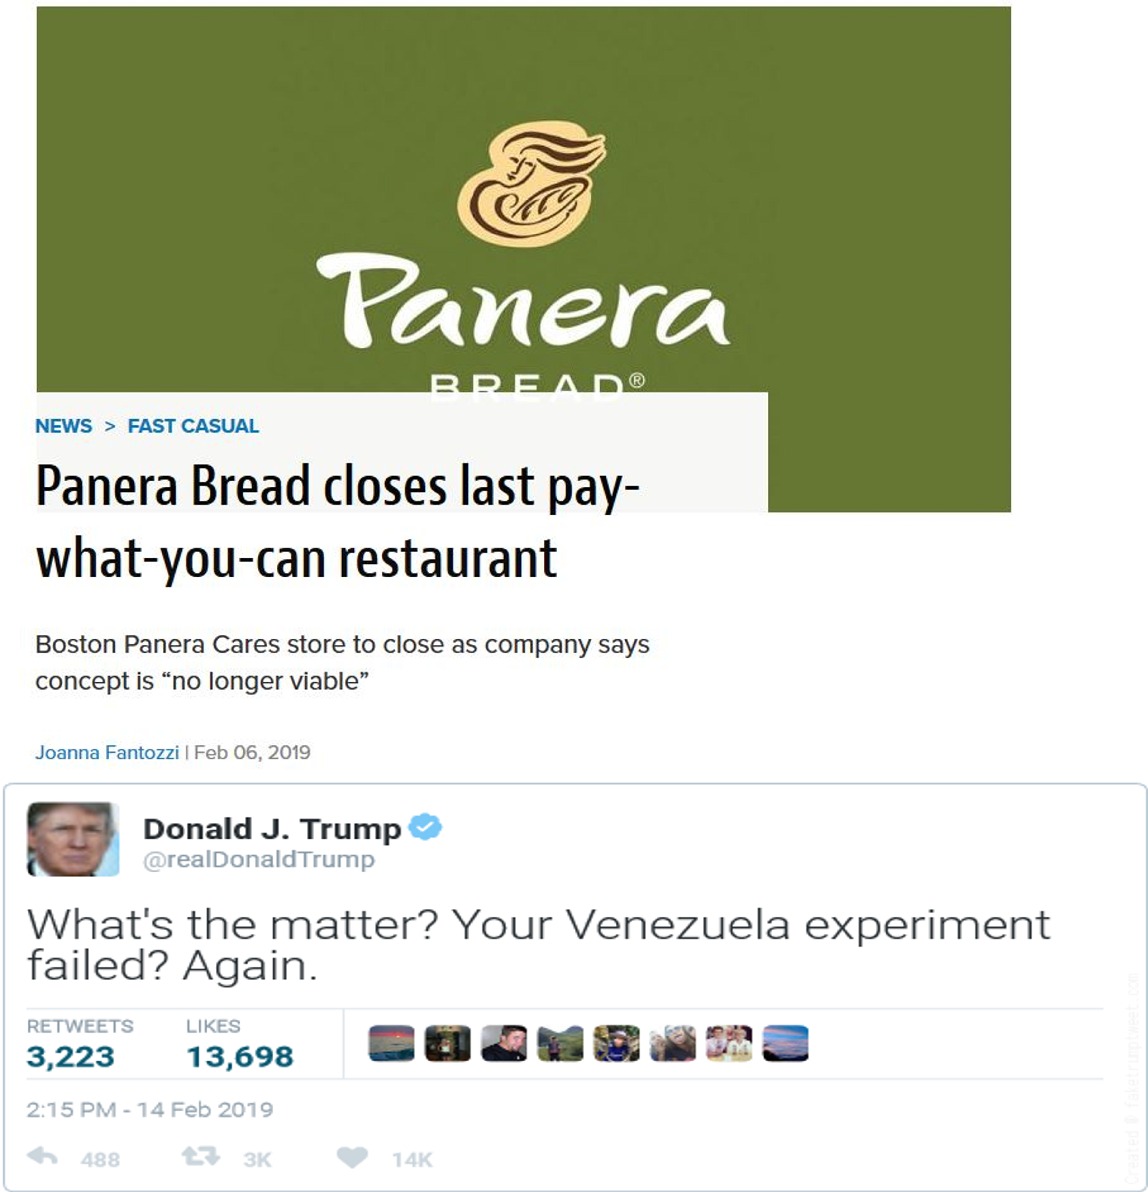 memes - web page - Panera Read News > Fast Casual Panera Bread closes last pay whatyoucan restaurant Boston Panera Cares store to close as company says concept is no longer viable Joanna Fantozzi Donald J. Trump Trump What's the matter? Your Venezuela exp